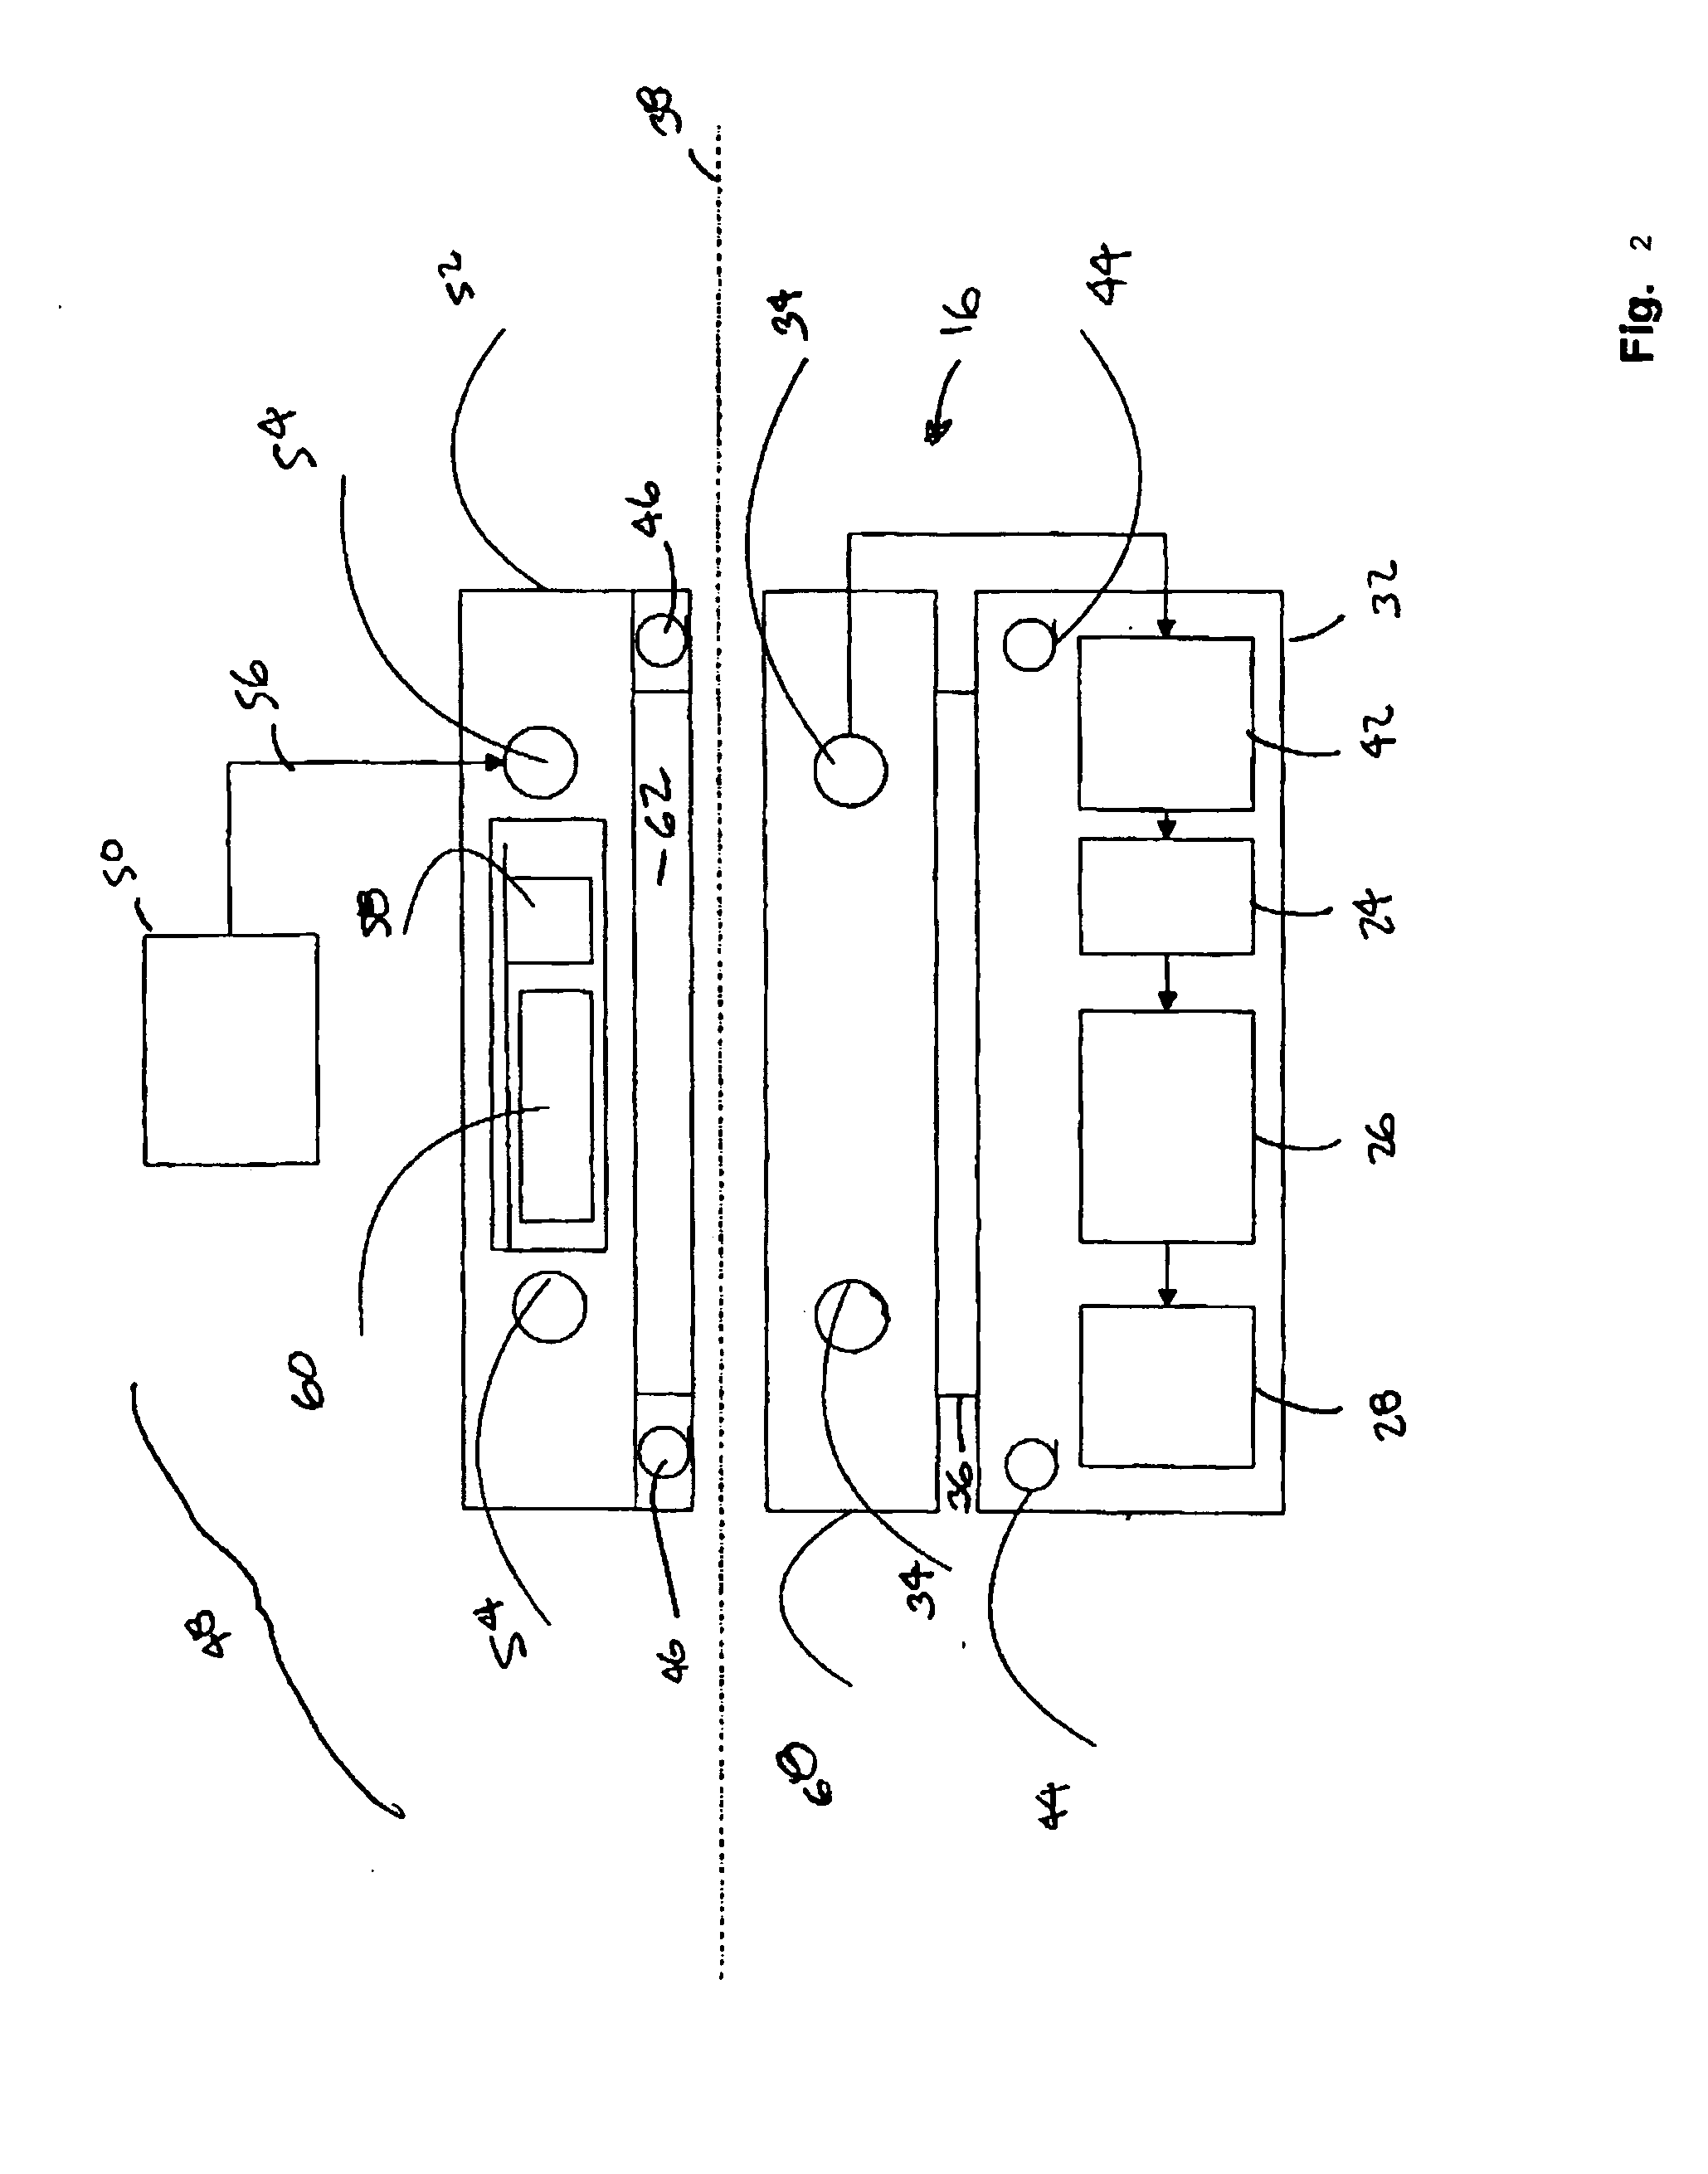 User interface for external charger for implantable medical device